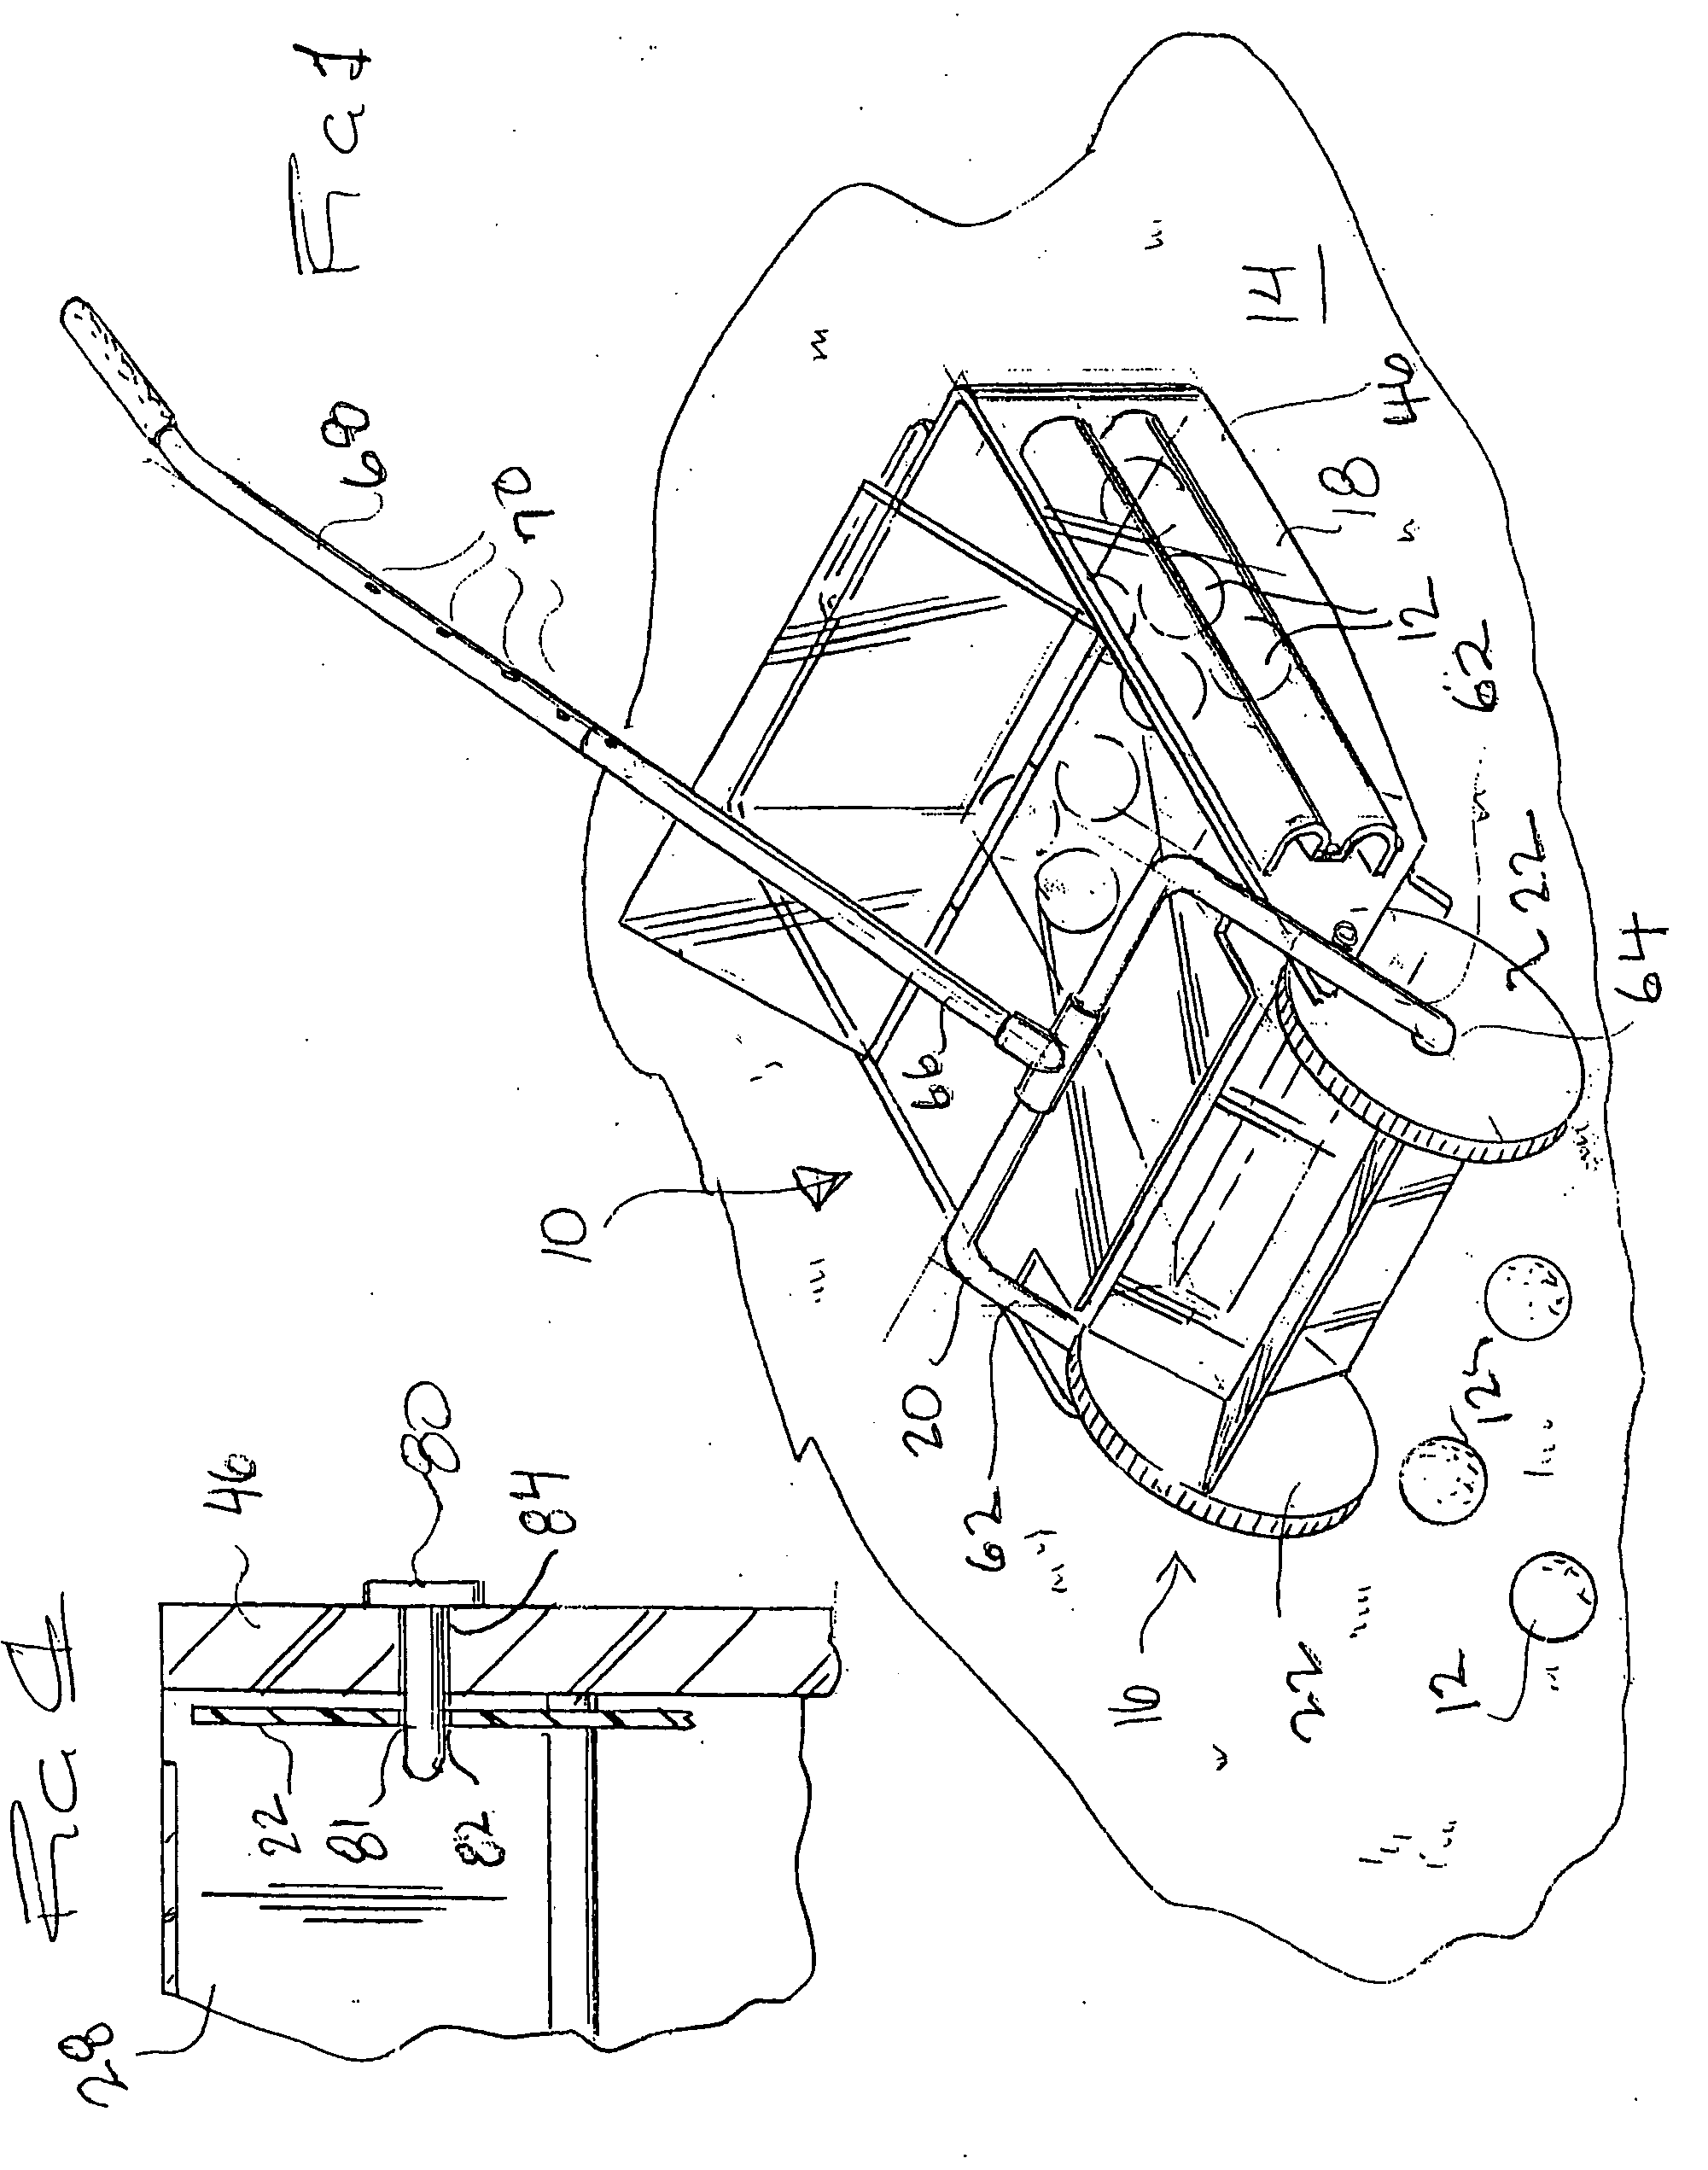 Tennis ball collection, dispensing, and transport apparatus